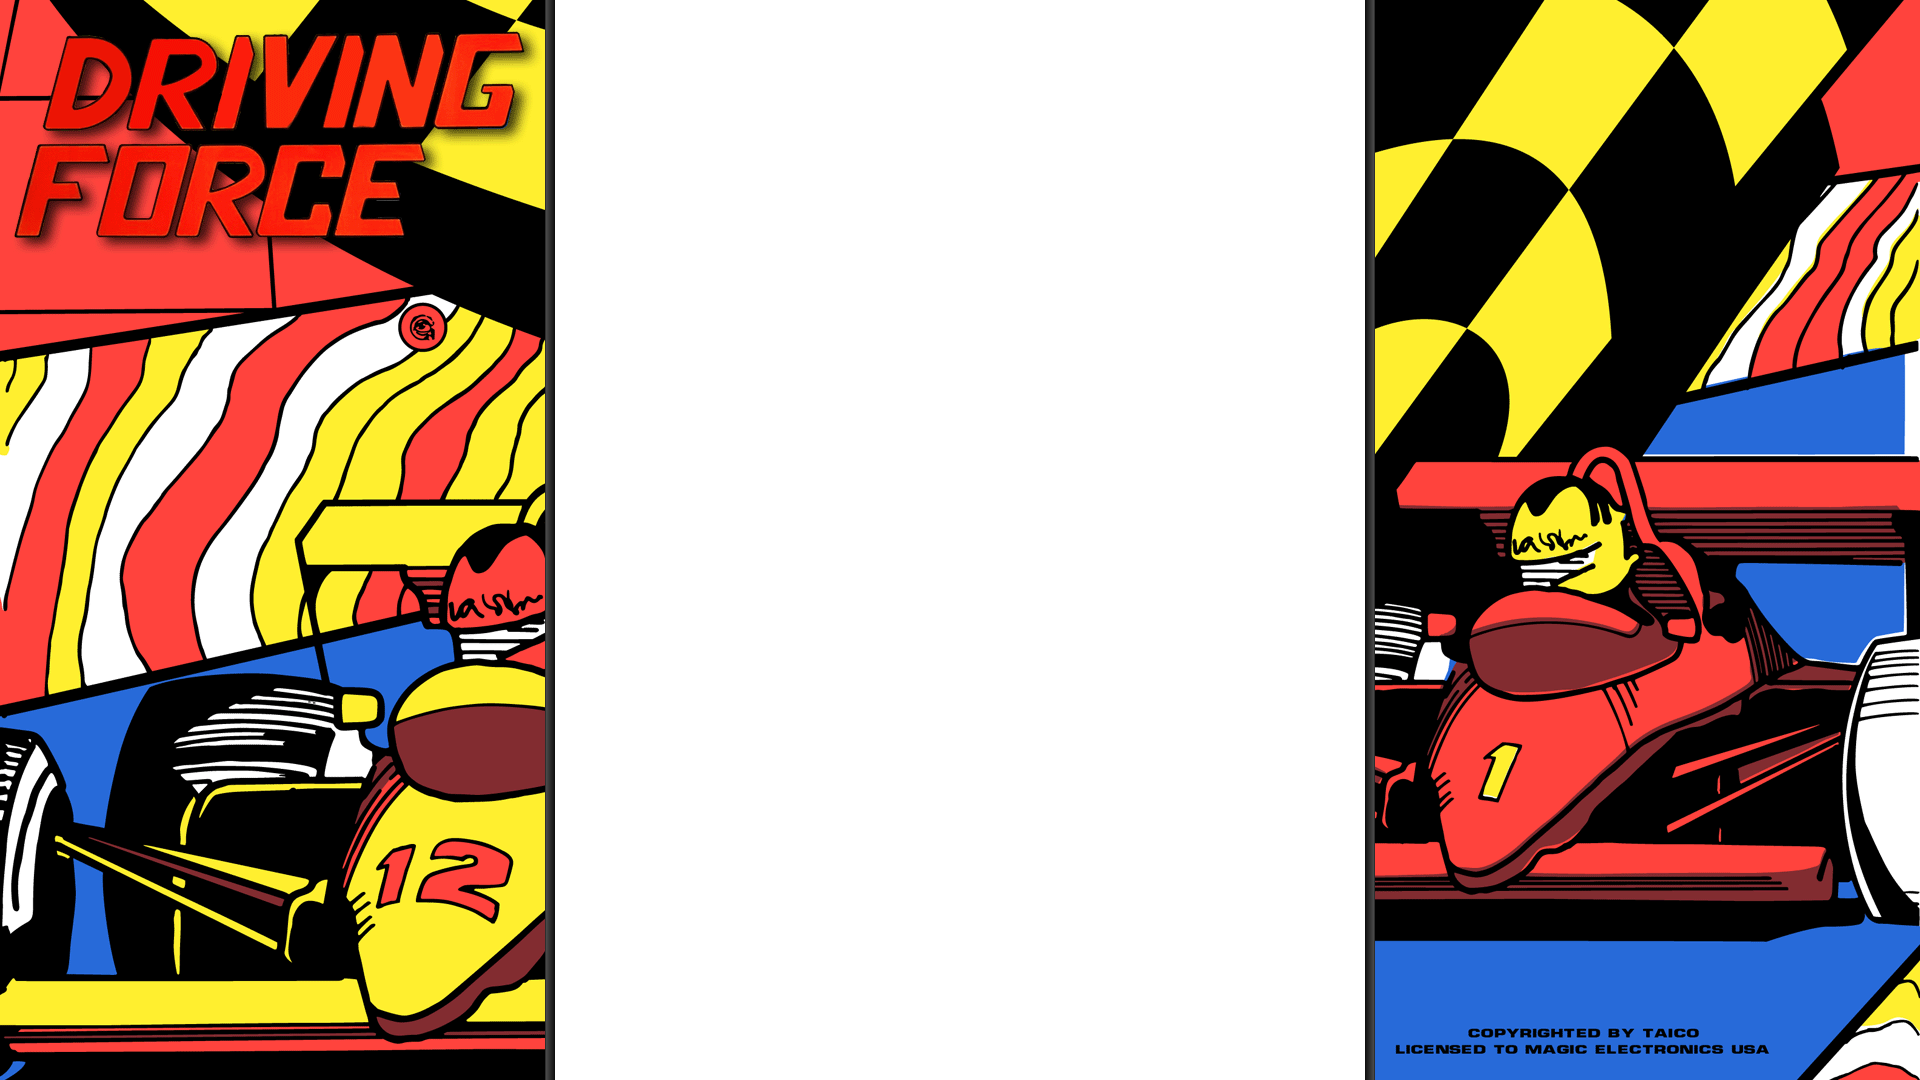 Driving Force 1080p overlay